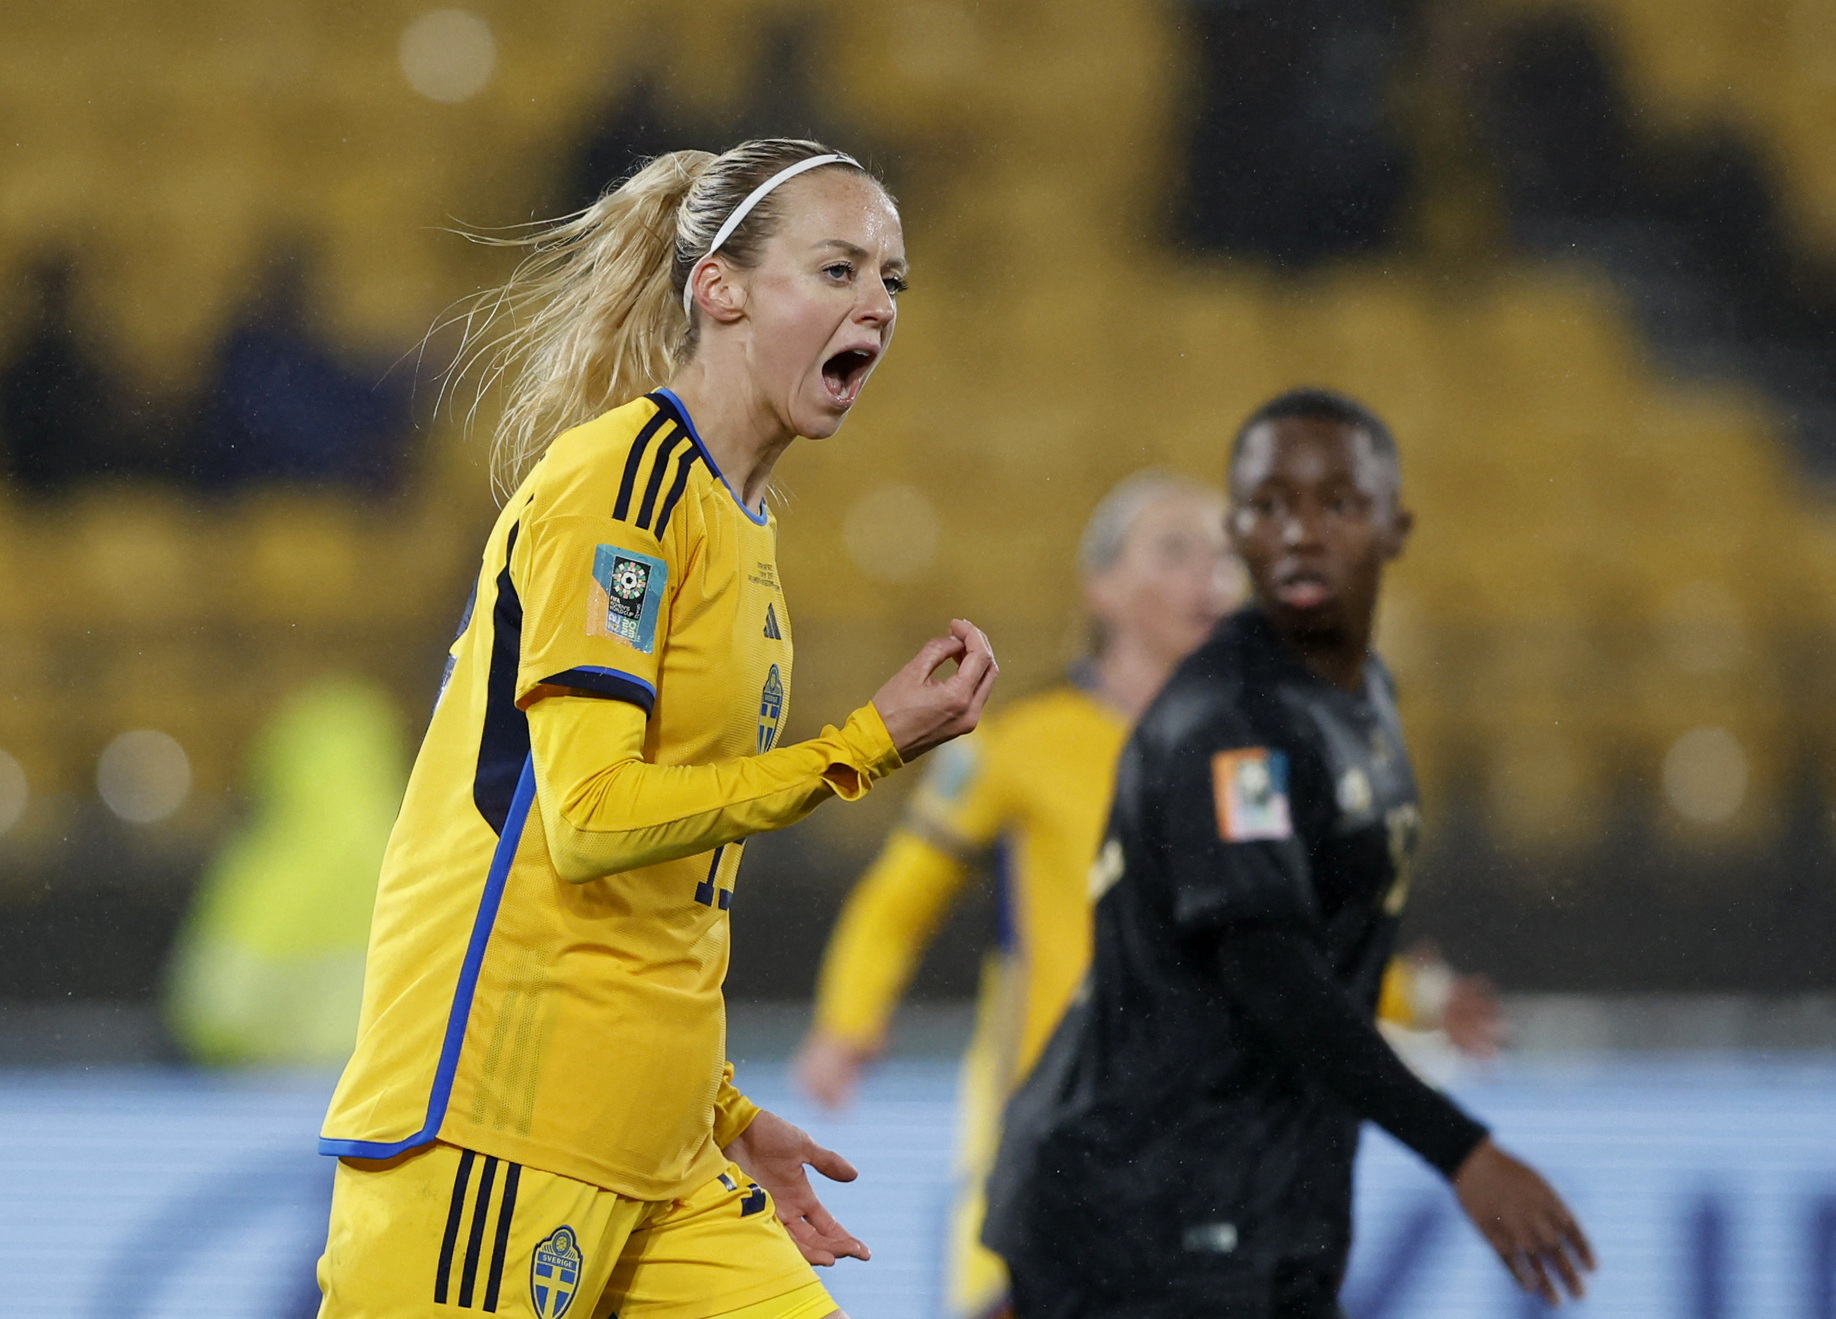 Sweden steal 2-1 win over South Africa in World Cup opener